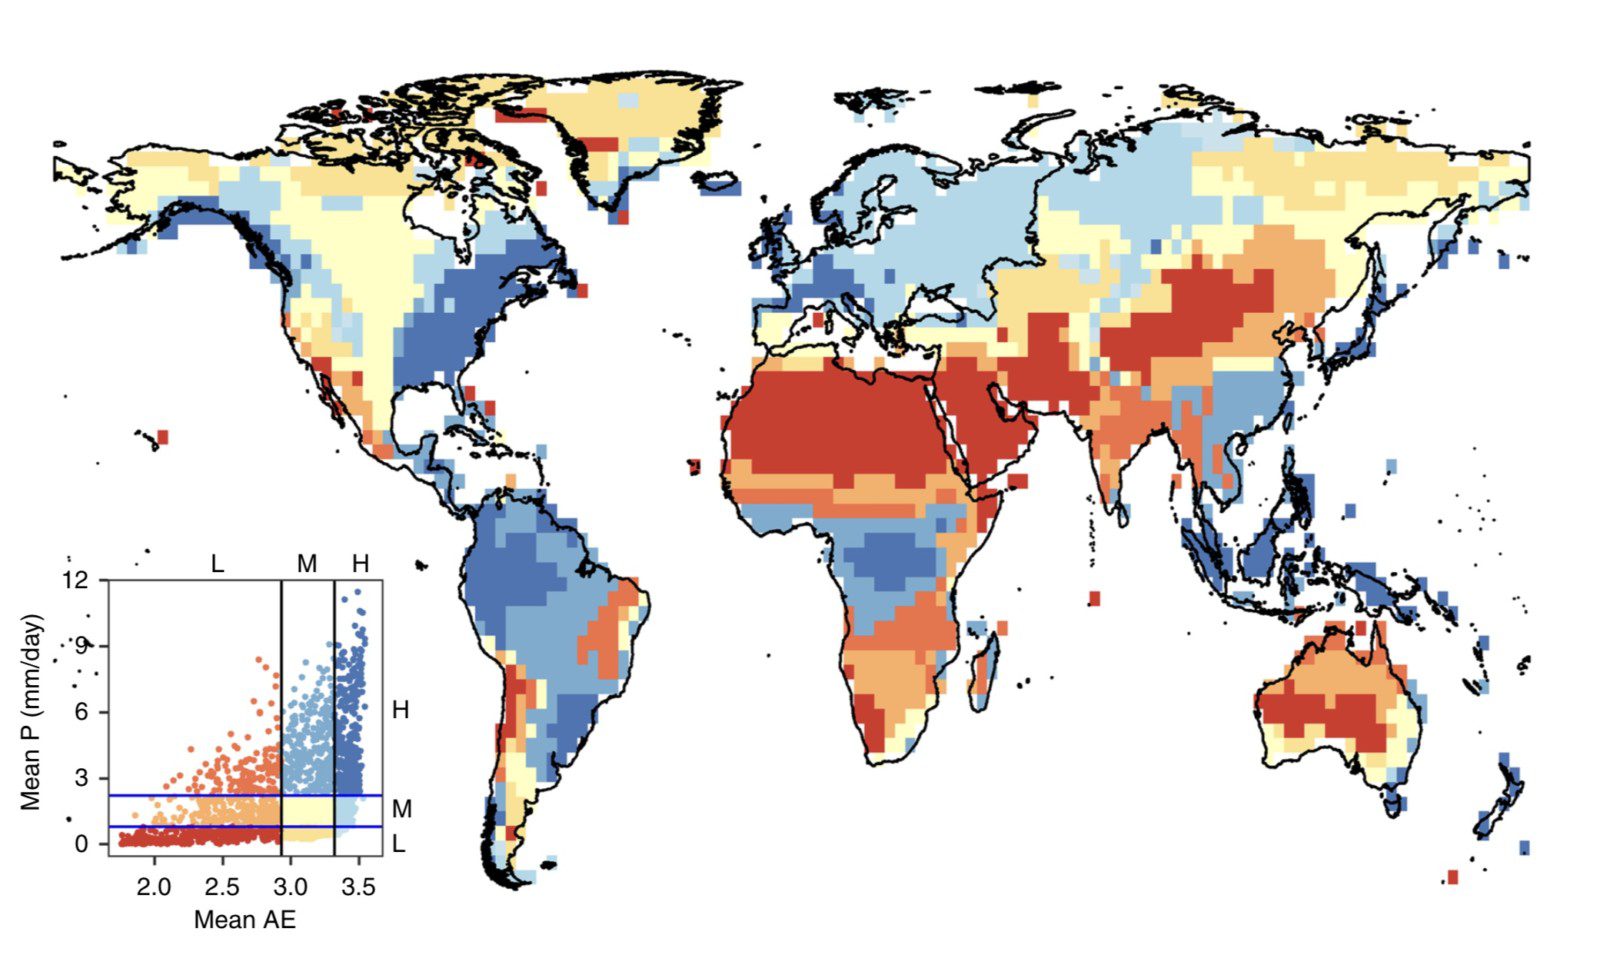 This map shows how various precipitation regions — also called regimes— are distributed throughout the world, according to new research involving Clemson University’s Ashok Mishra. Areas in dark orange are most vulnerable to extremes in wet and dry seasons, a trend expected to become more intense as the climate changes, researchers found. You can learn more here: https://www.nature.com/articles/s41467-020-16757-w